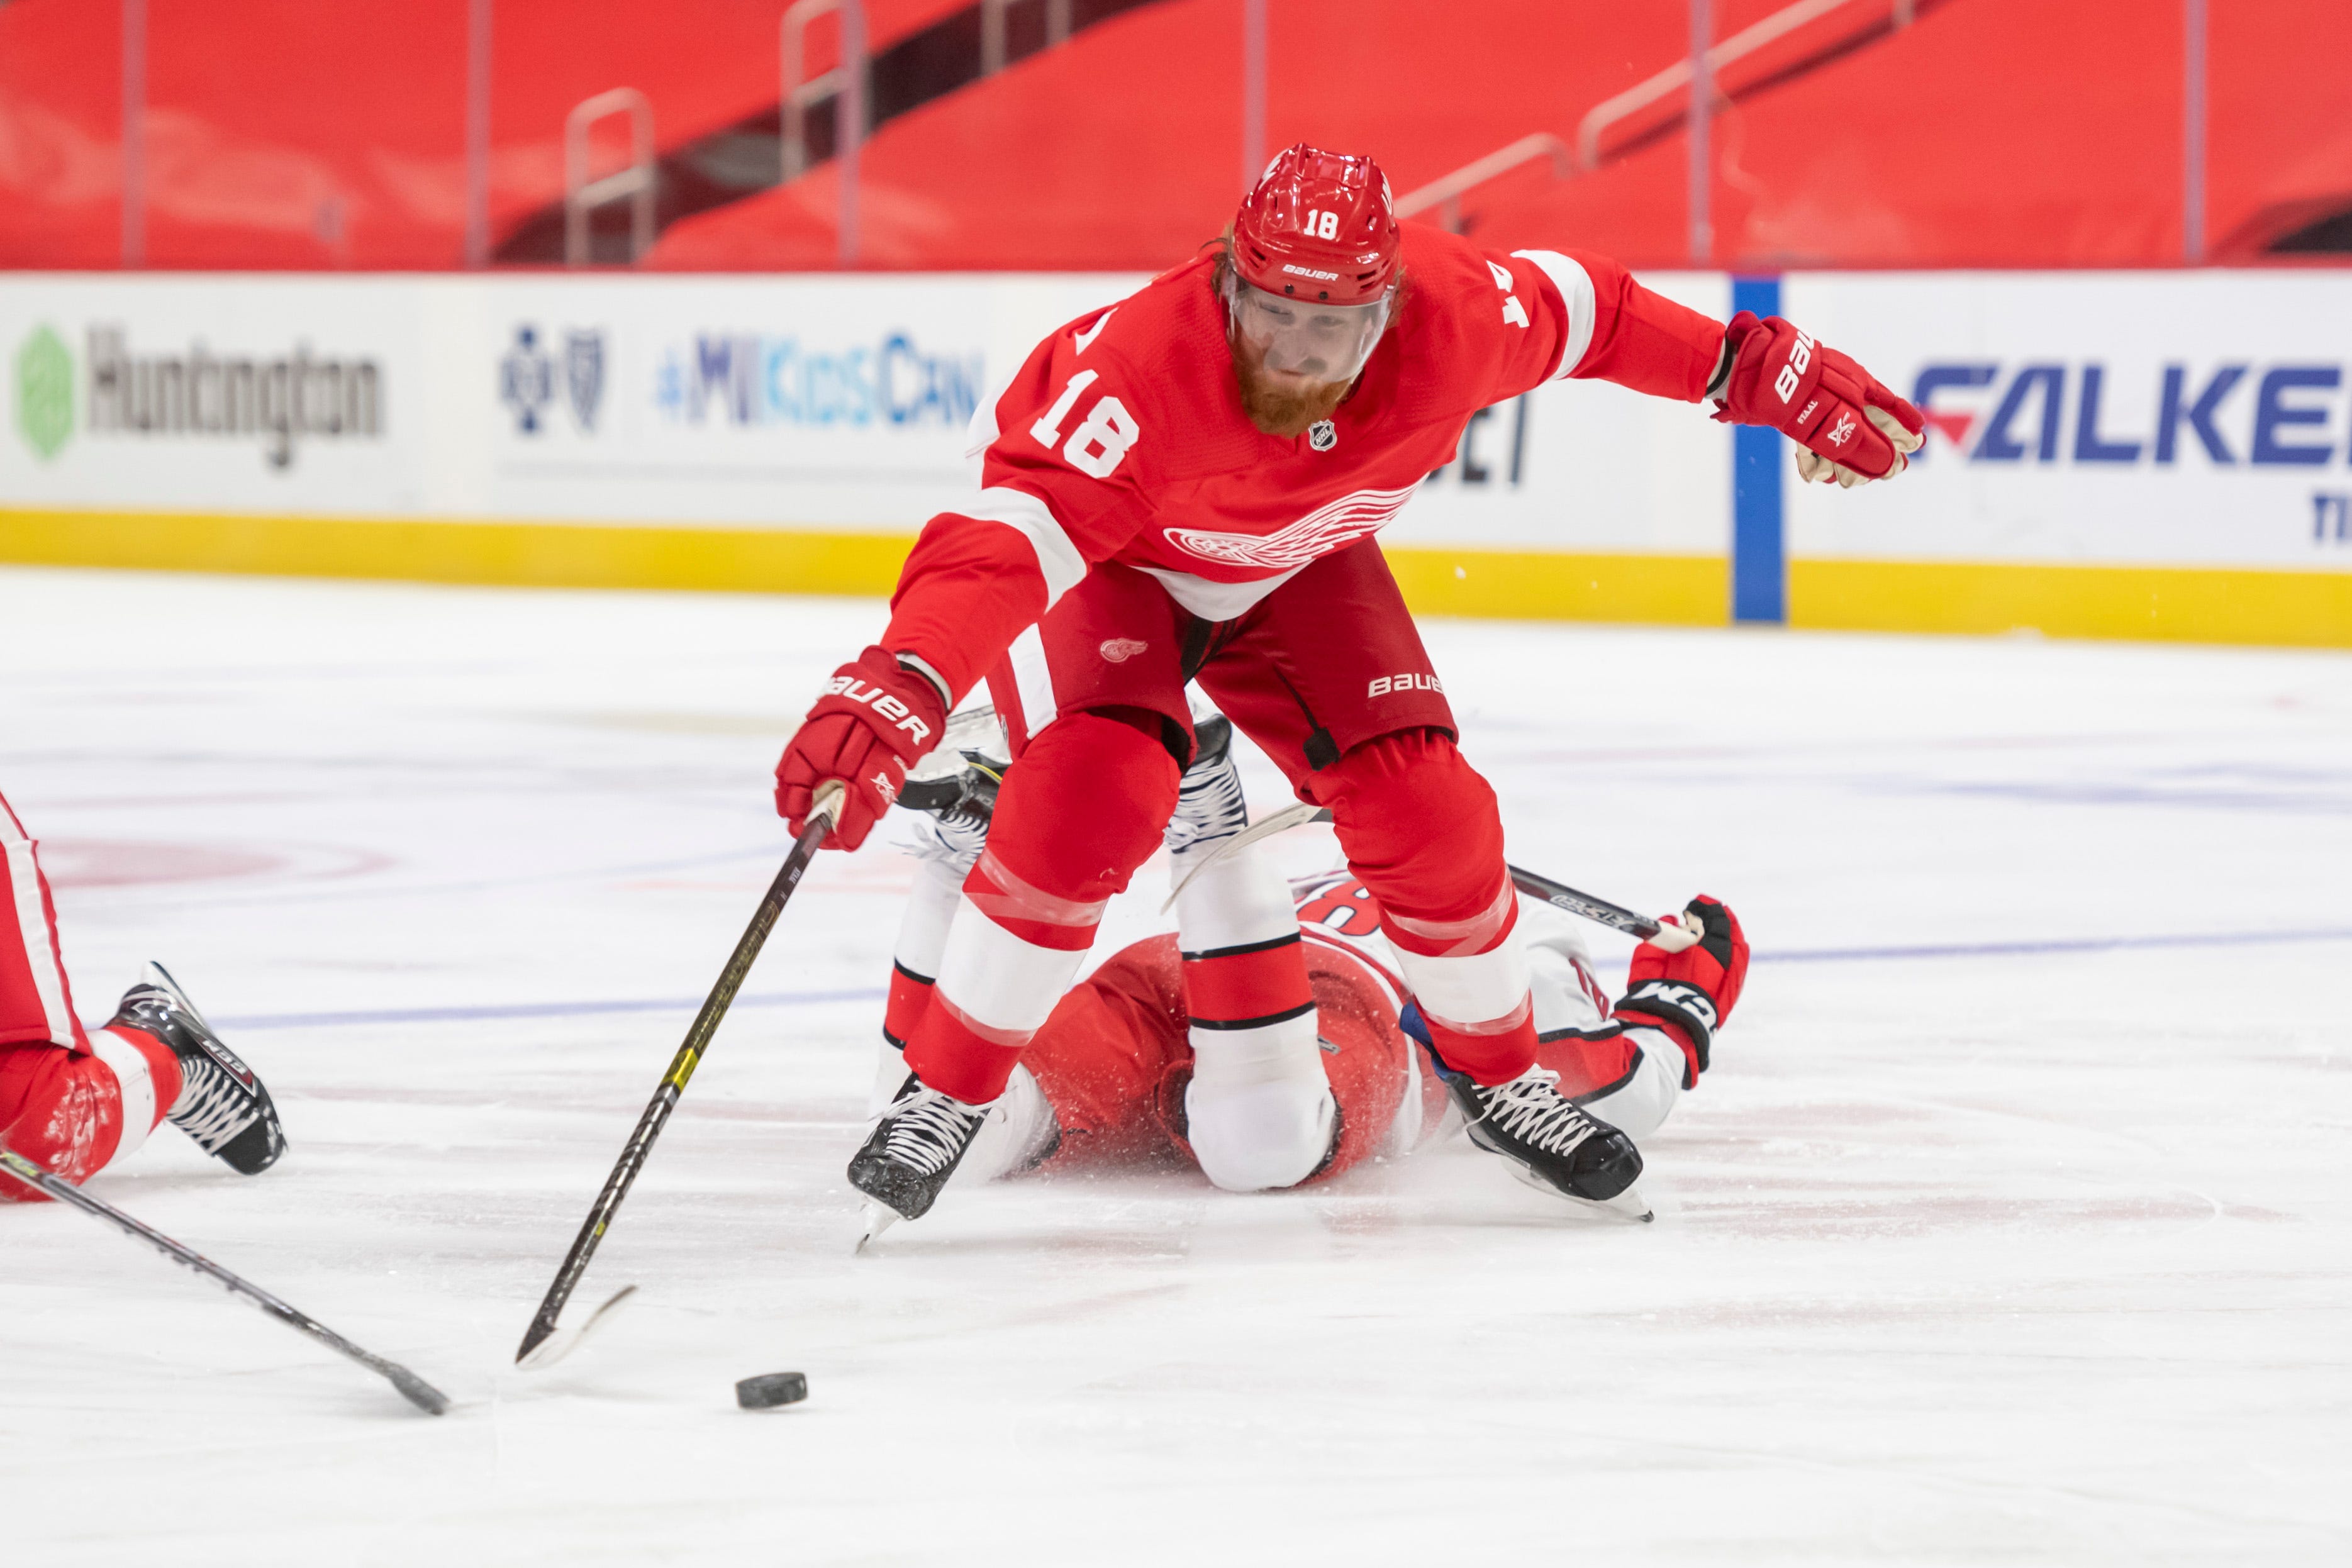 Detroit defenseman Marc Staal skates around a fallen Carolina center Ryan Dzingel while battling for the puck in the second period.